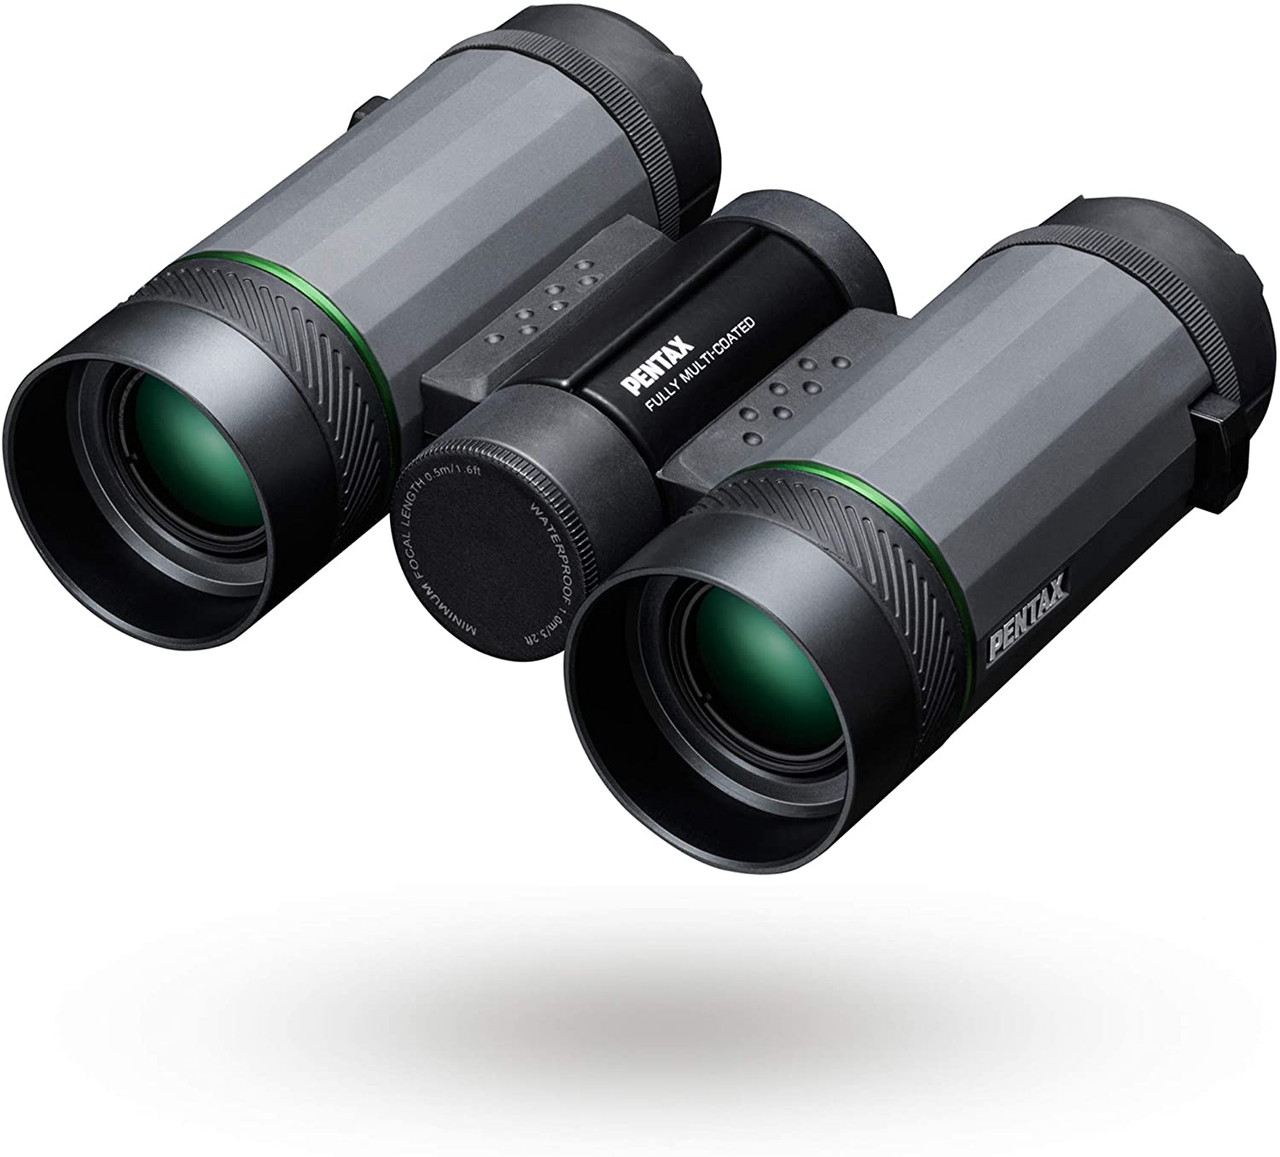 PENTAX VD 4x20 WP World's First Separable Binoculars: 3 in 1 Binoculars (Can also be used as a monocular or 16x telescope) Bright, clear and high optical performance High waterproof 63600